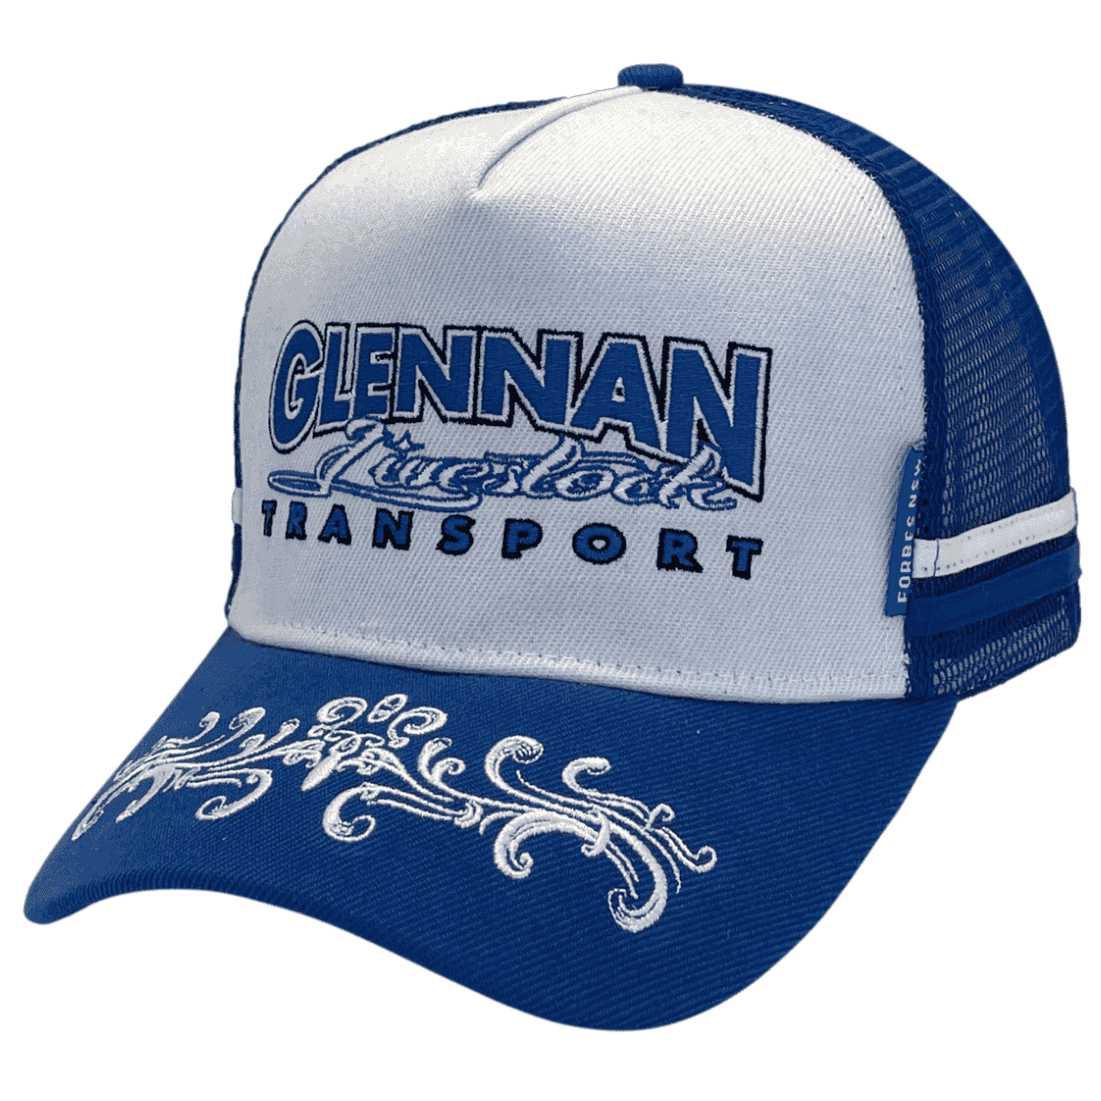 Glennan Livestock Transport Forbes NSW HP Original Power Aussie Trucker Hat with Double Side Bands